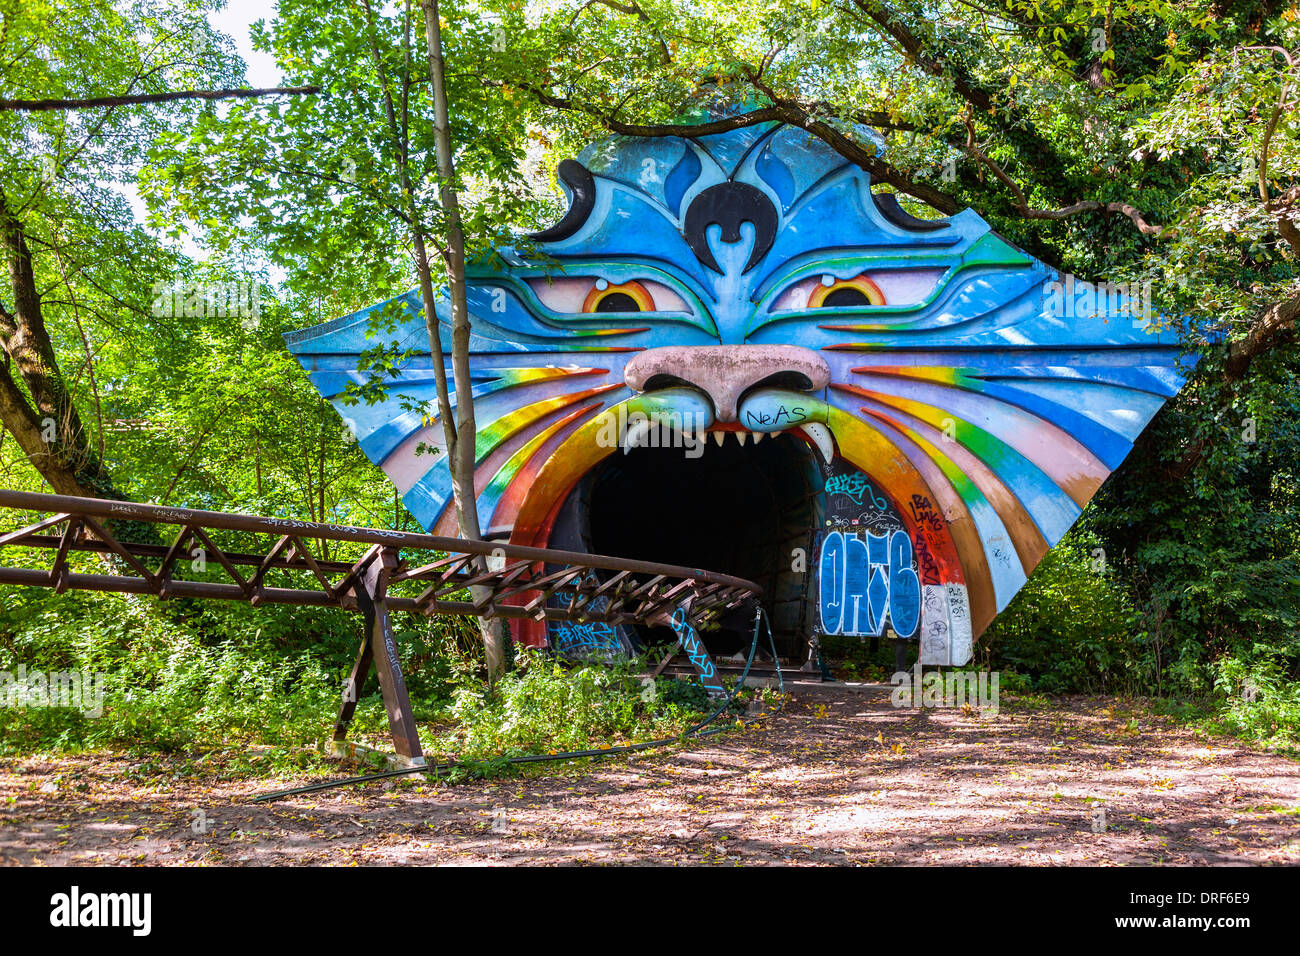 Rollercoaster and monster mouth entrance to tunnel in disused, derelict amusement park - Spreepark, Planterwald, Berlin, Germany Stock Photo